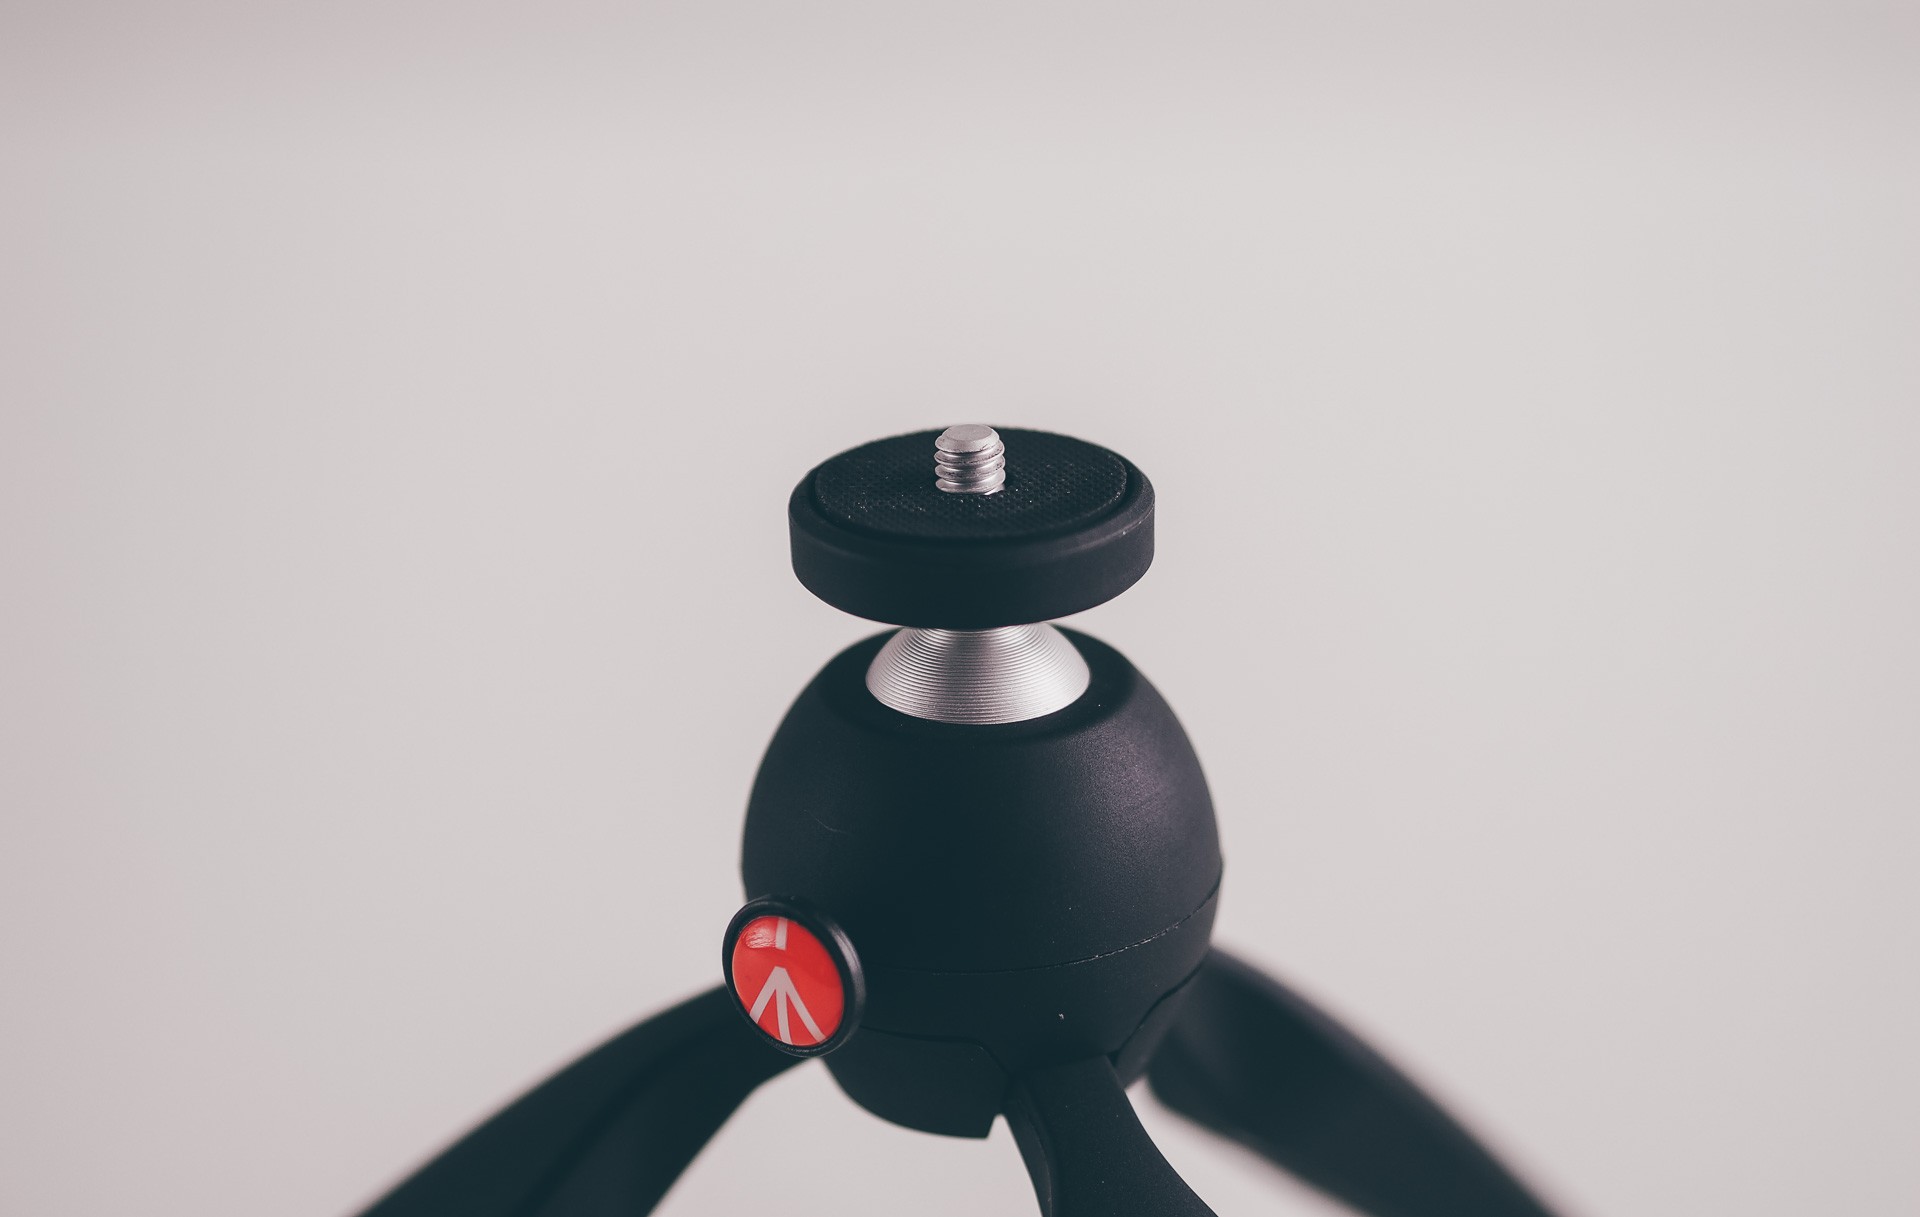 The PIXI Mini’s ball head has a very sturdy screw and is circled by the same rubber found on the tripod’s feet.